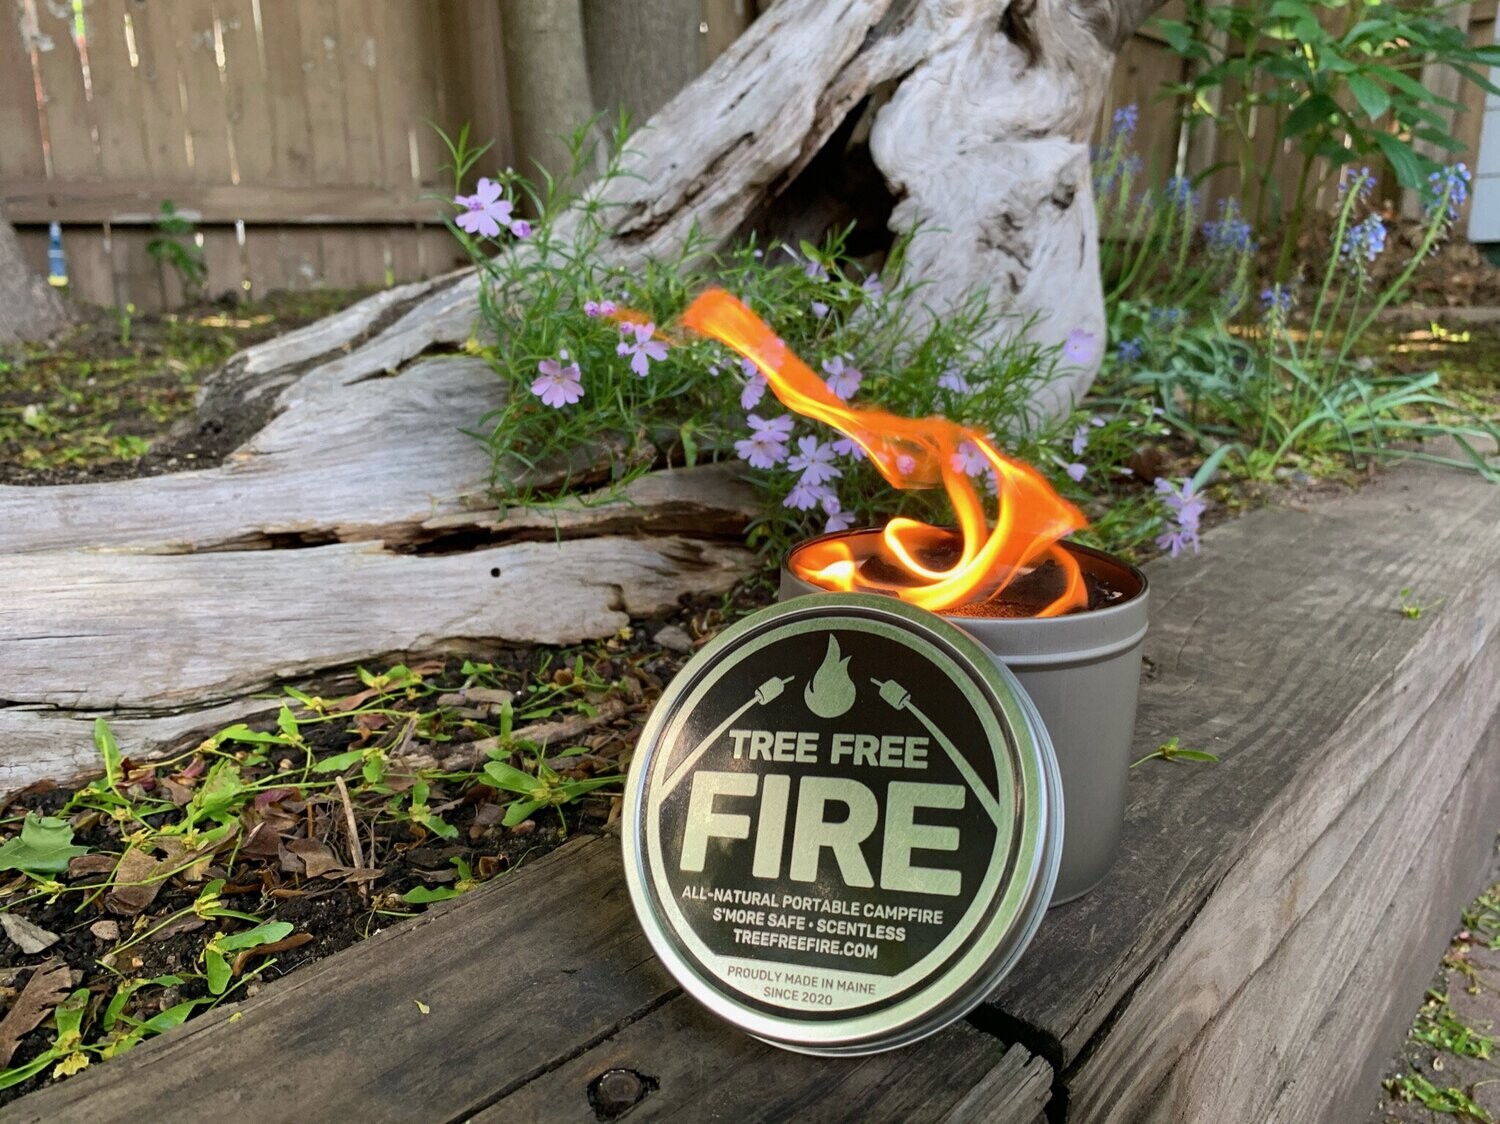 Tree-Free Fire for s'mores